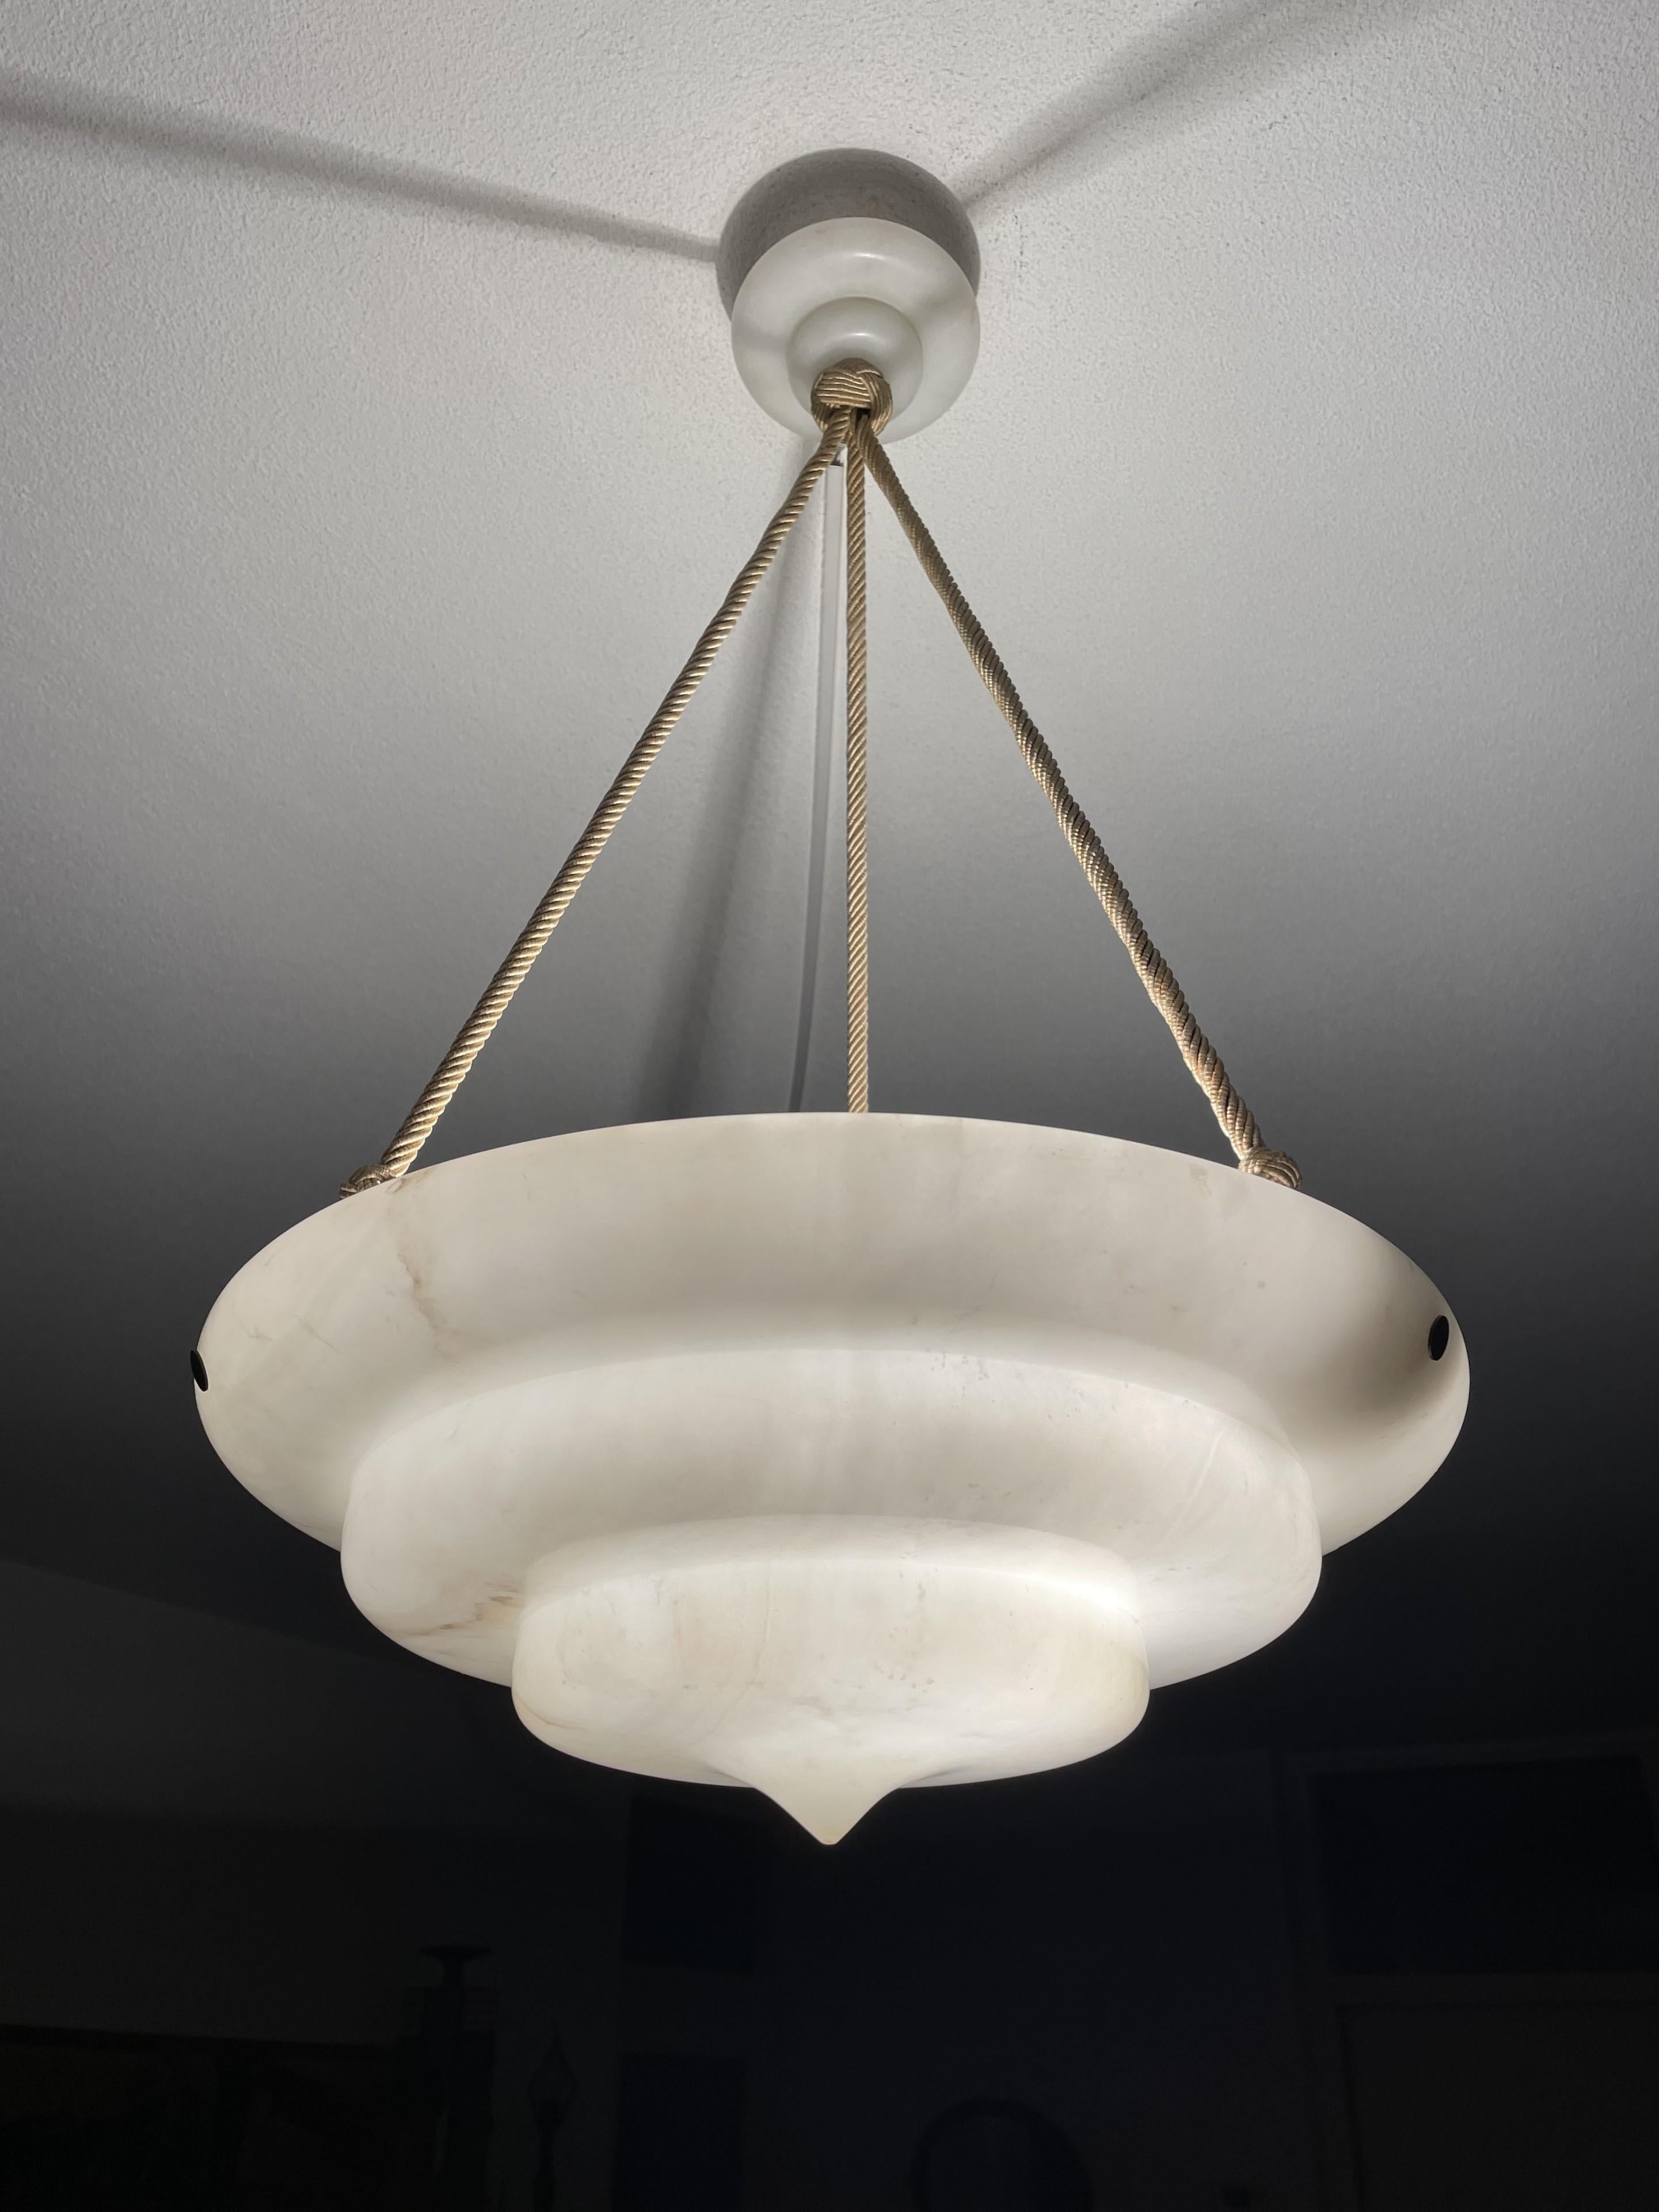 Exceptional Art Deco Hand Carved & Layered Alabaster Pendant Light w. Rope Chain For Sale 6